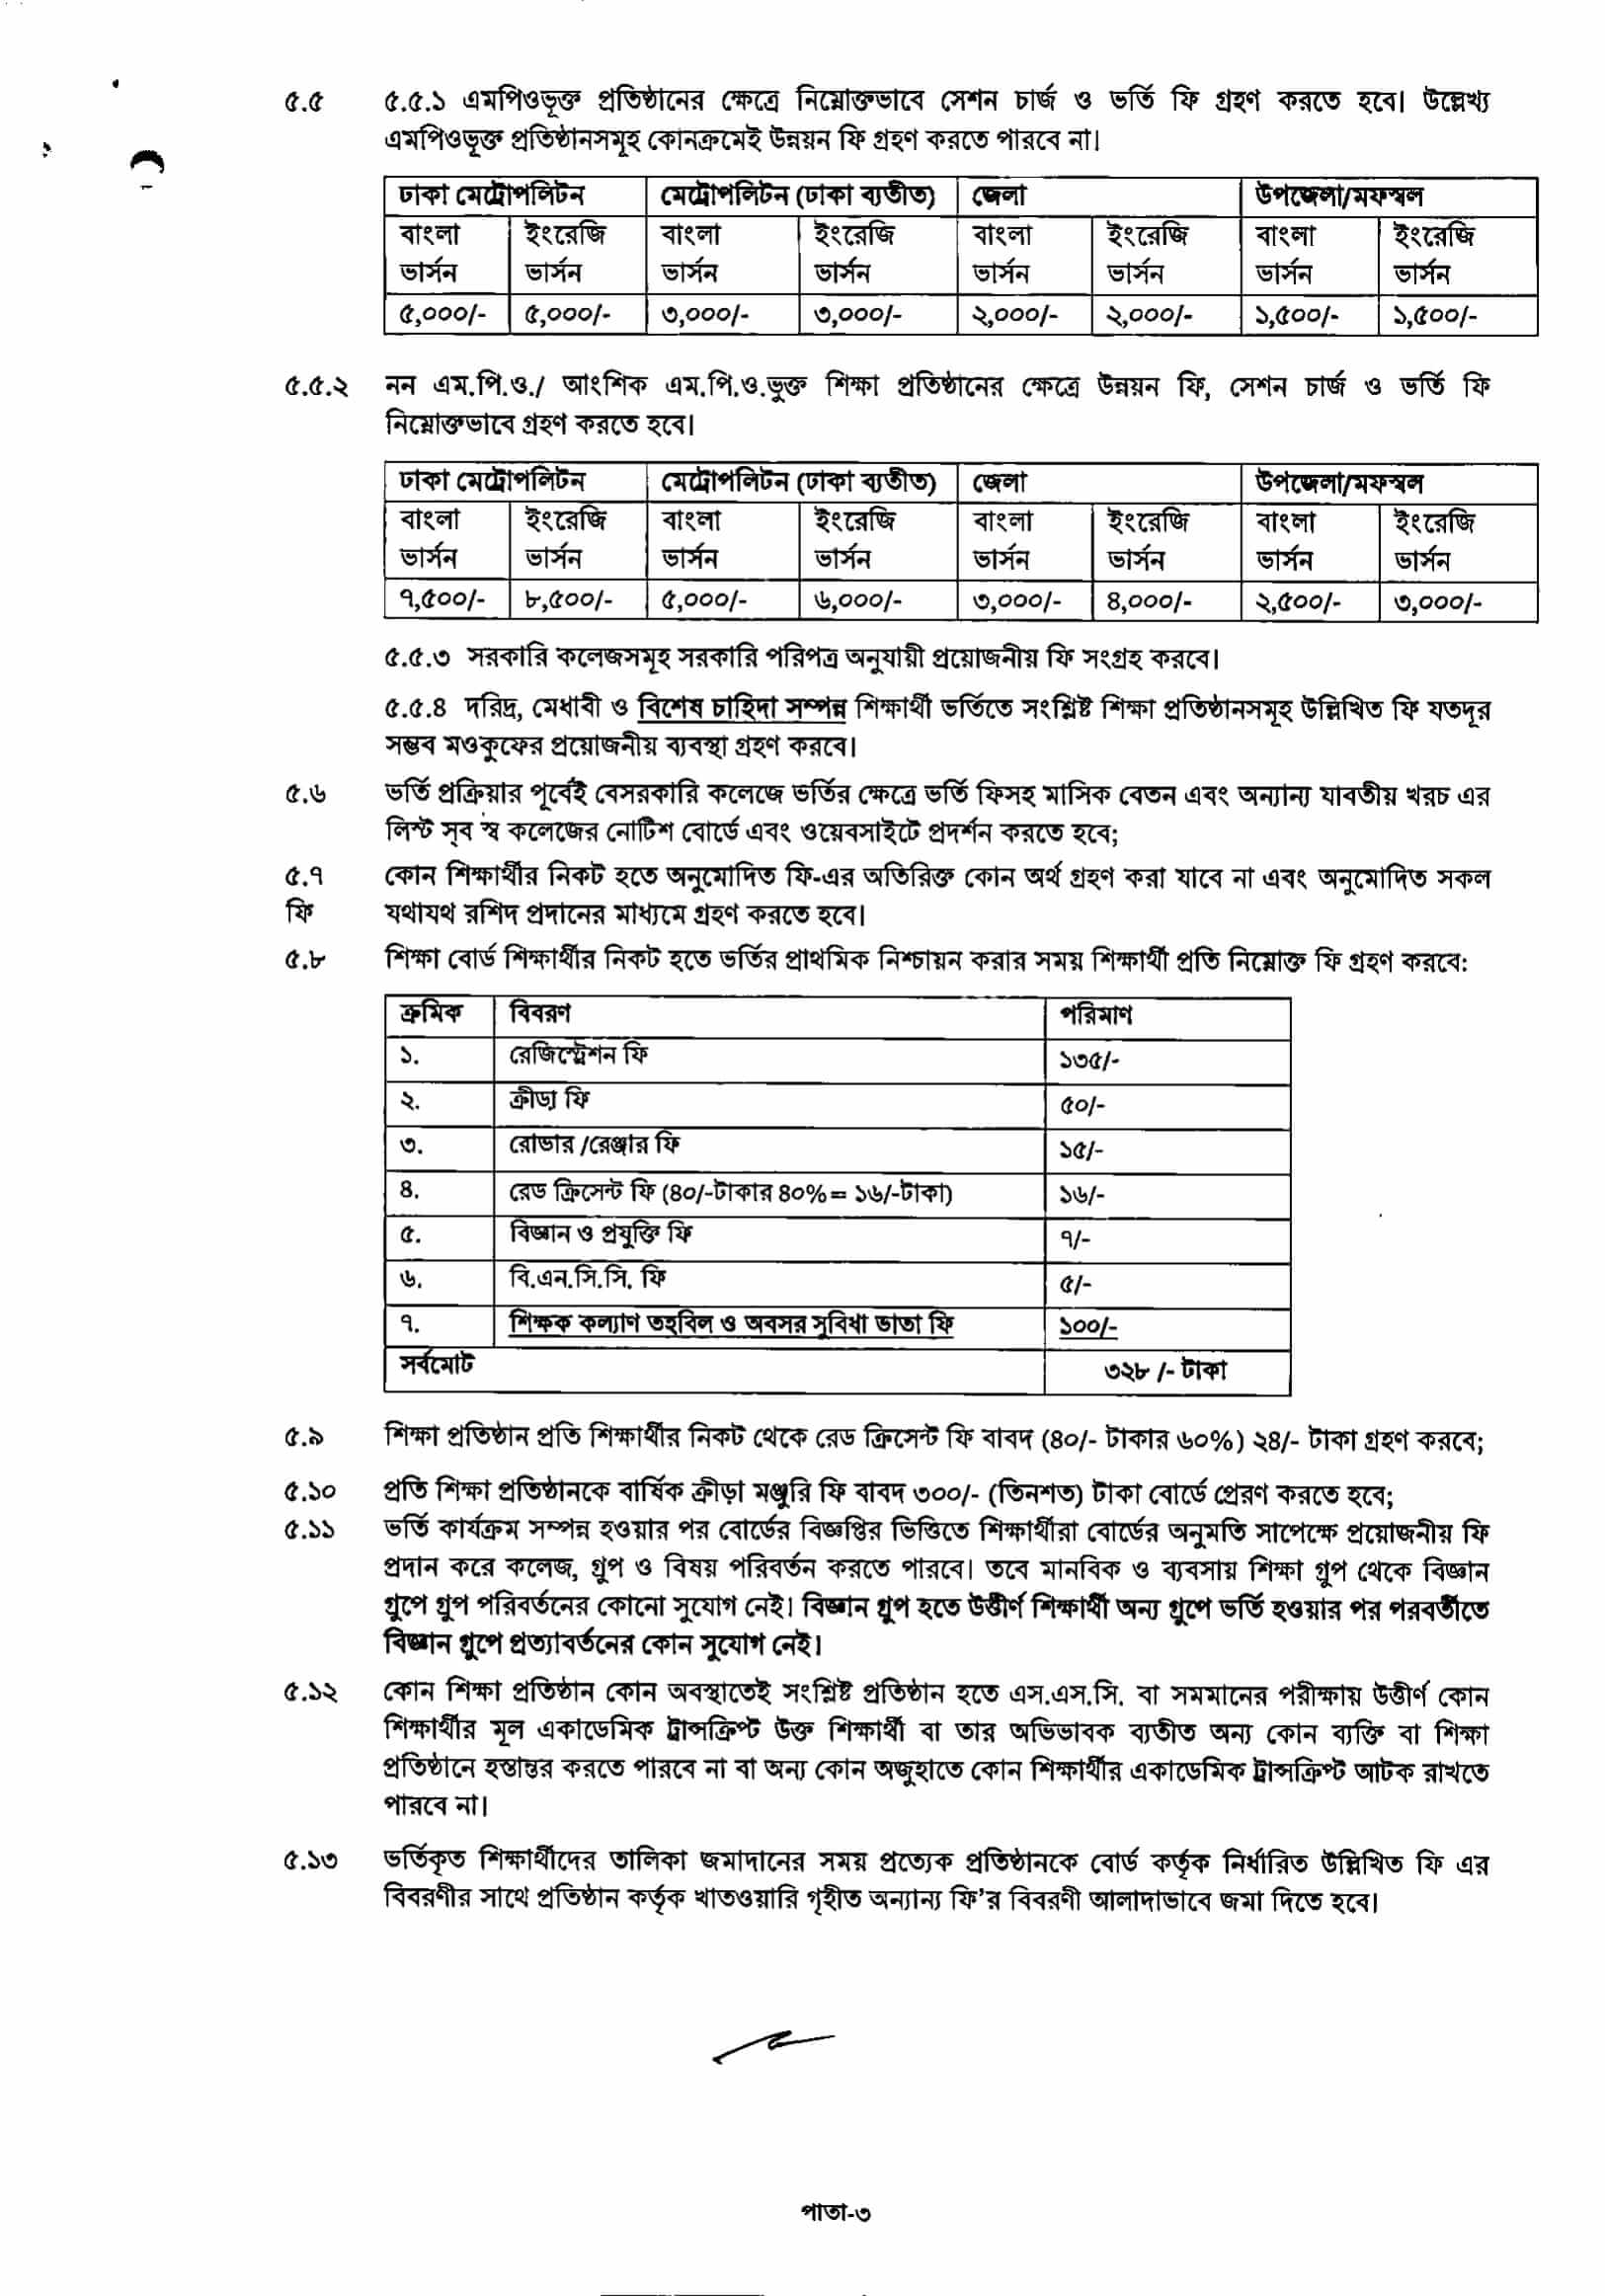 Xi Class Admission Result 2023